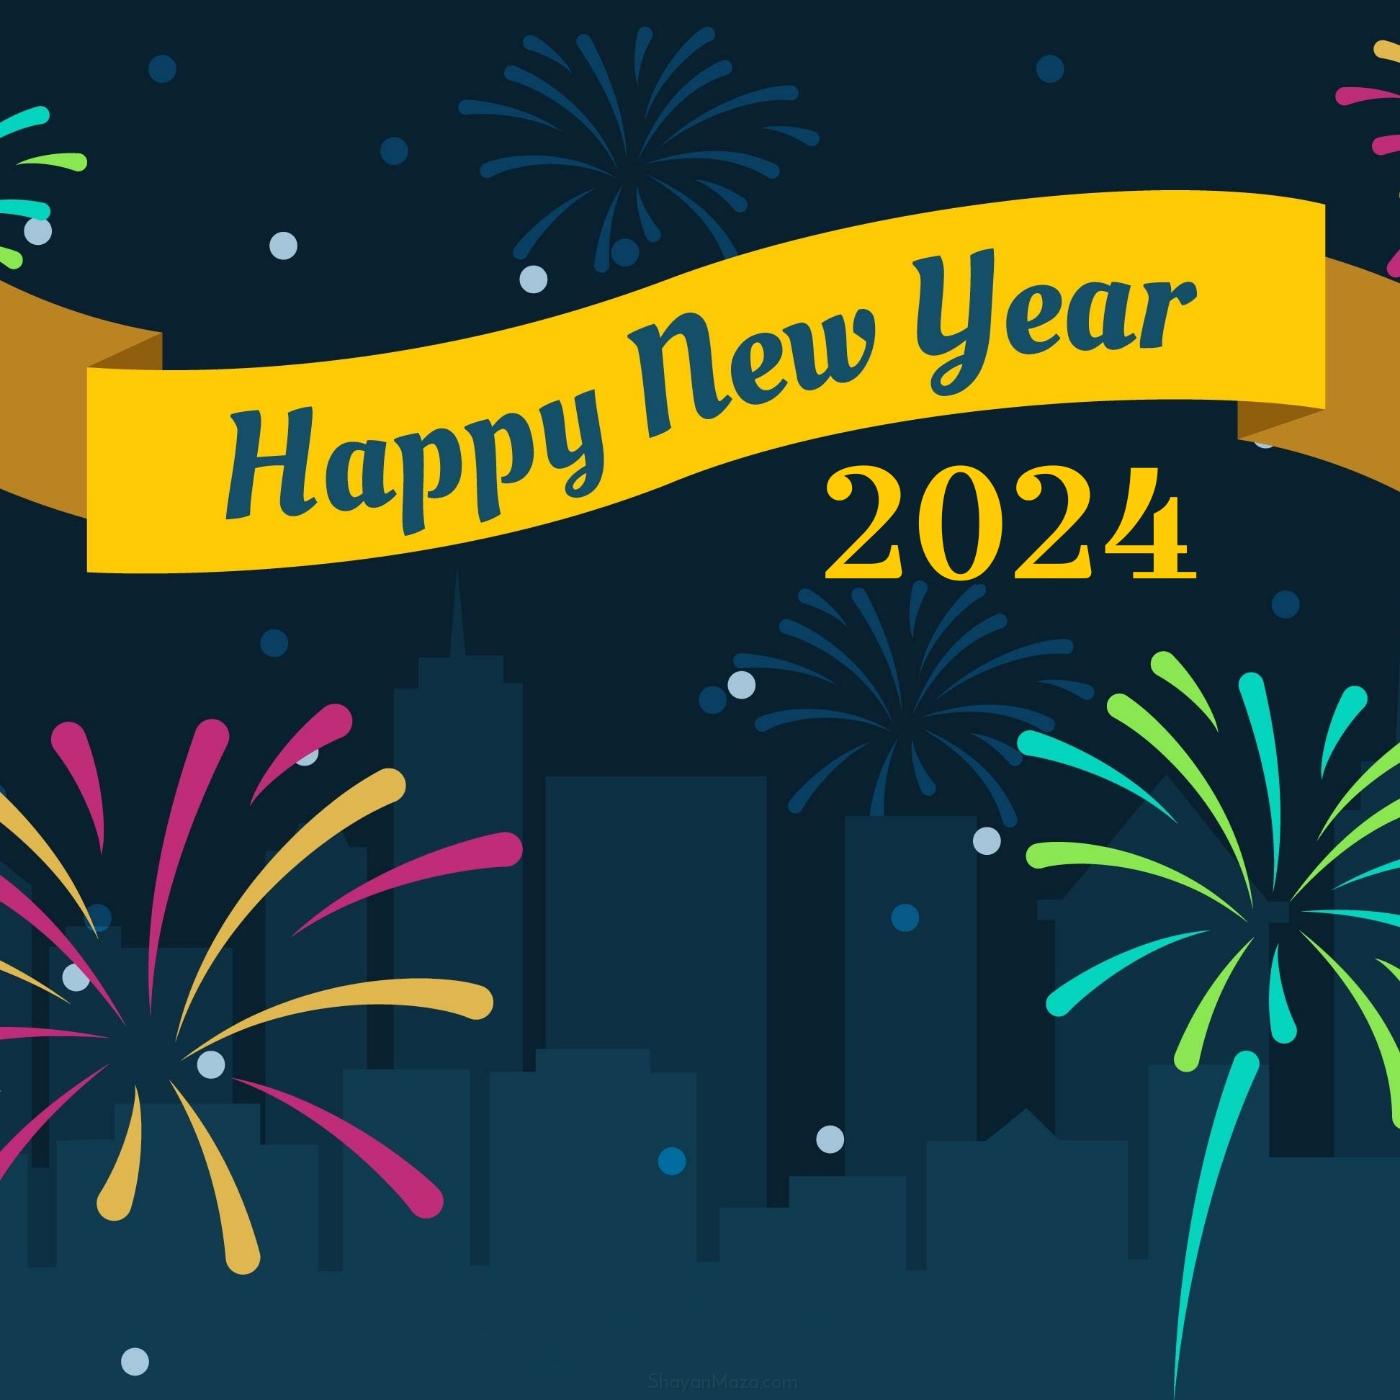 Happy New Year 2024 Images HD Download